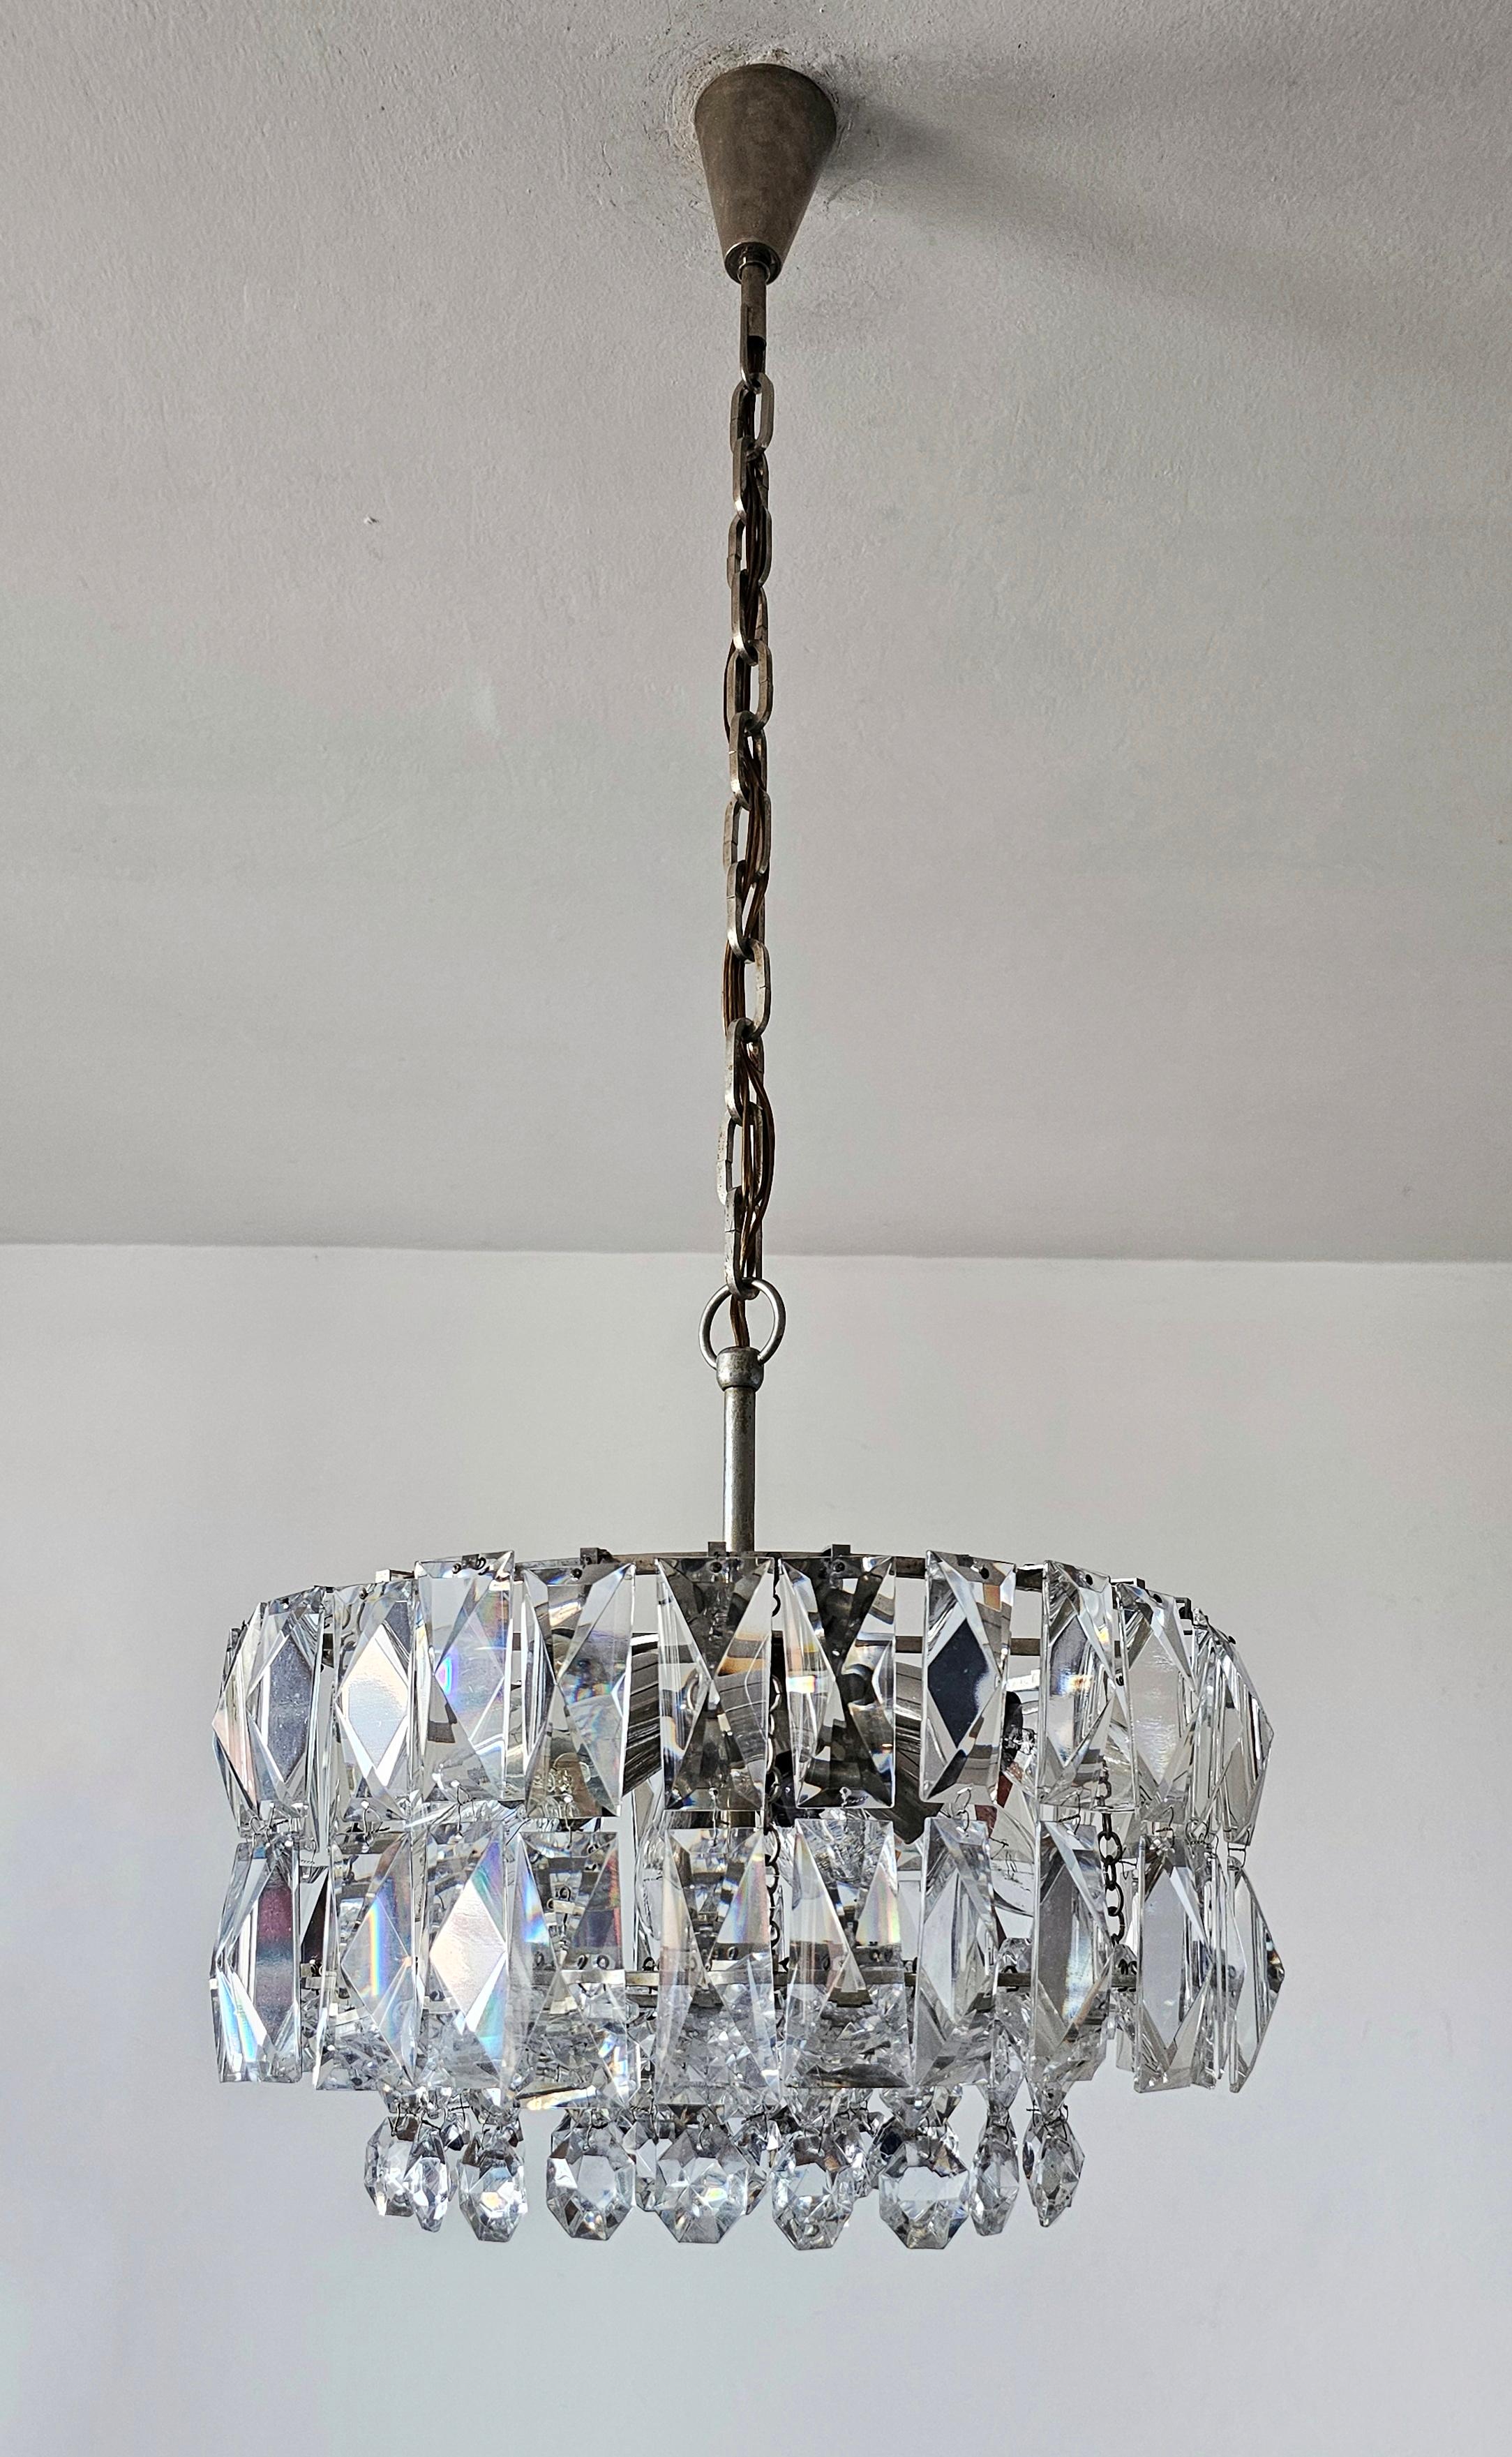 Austrian Mid Century Modern Nickel Plated Crystal Chandelier by Bakalowits, Austria 1960s For Sale